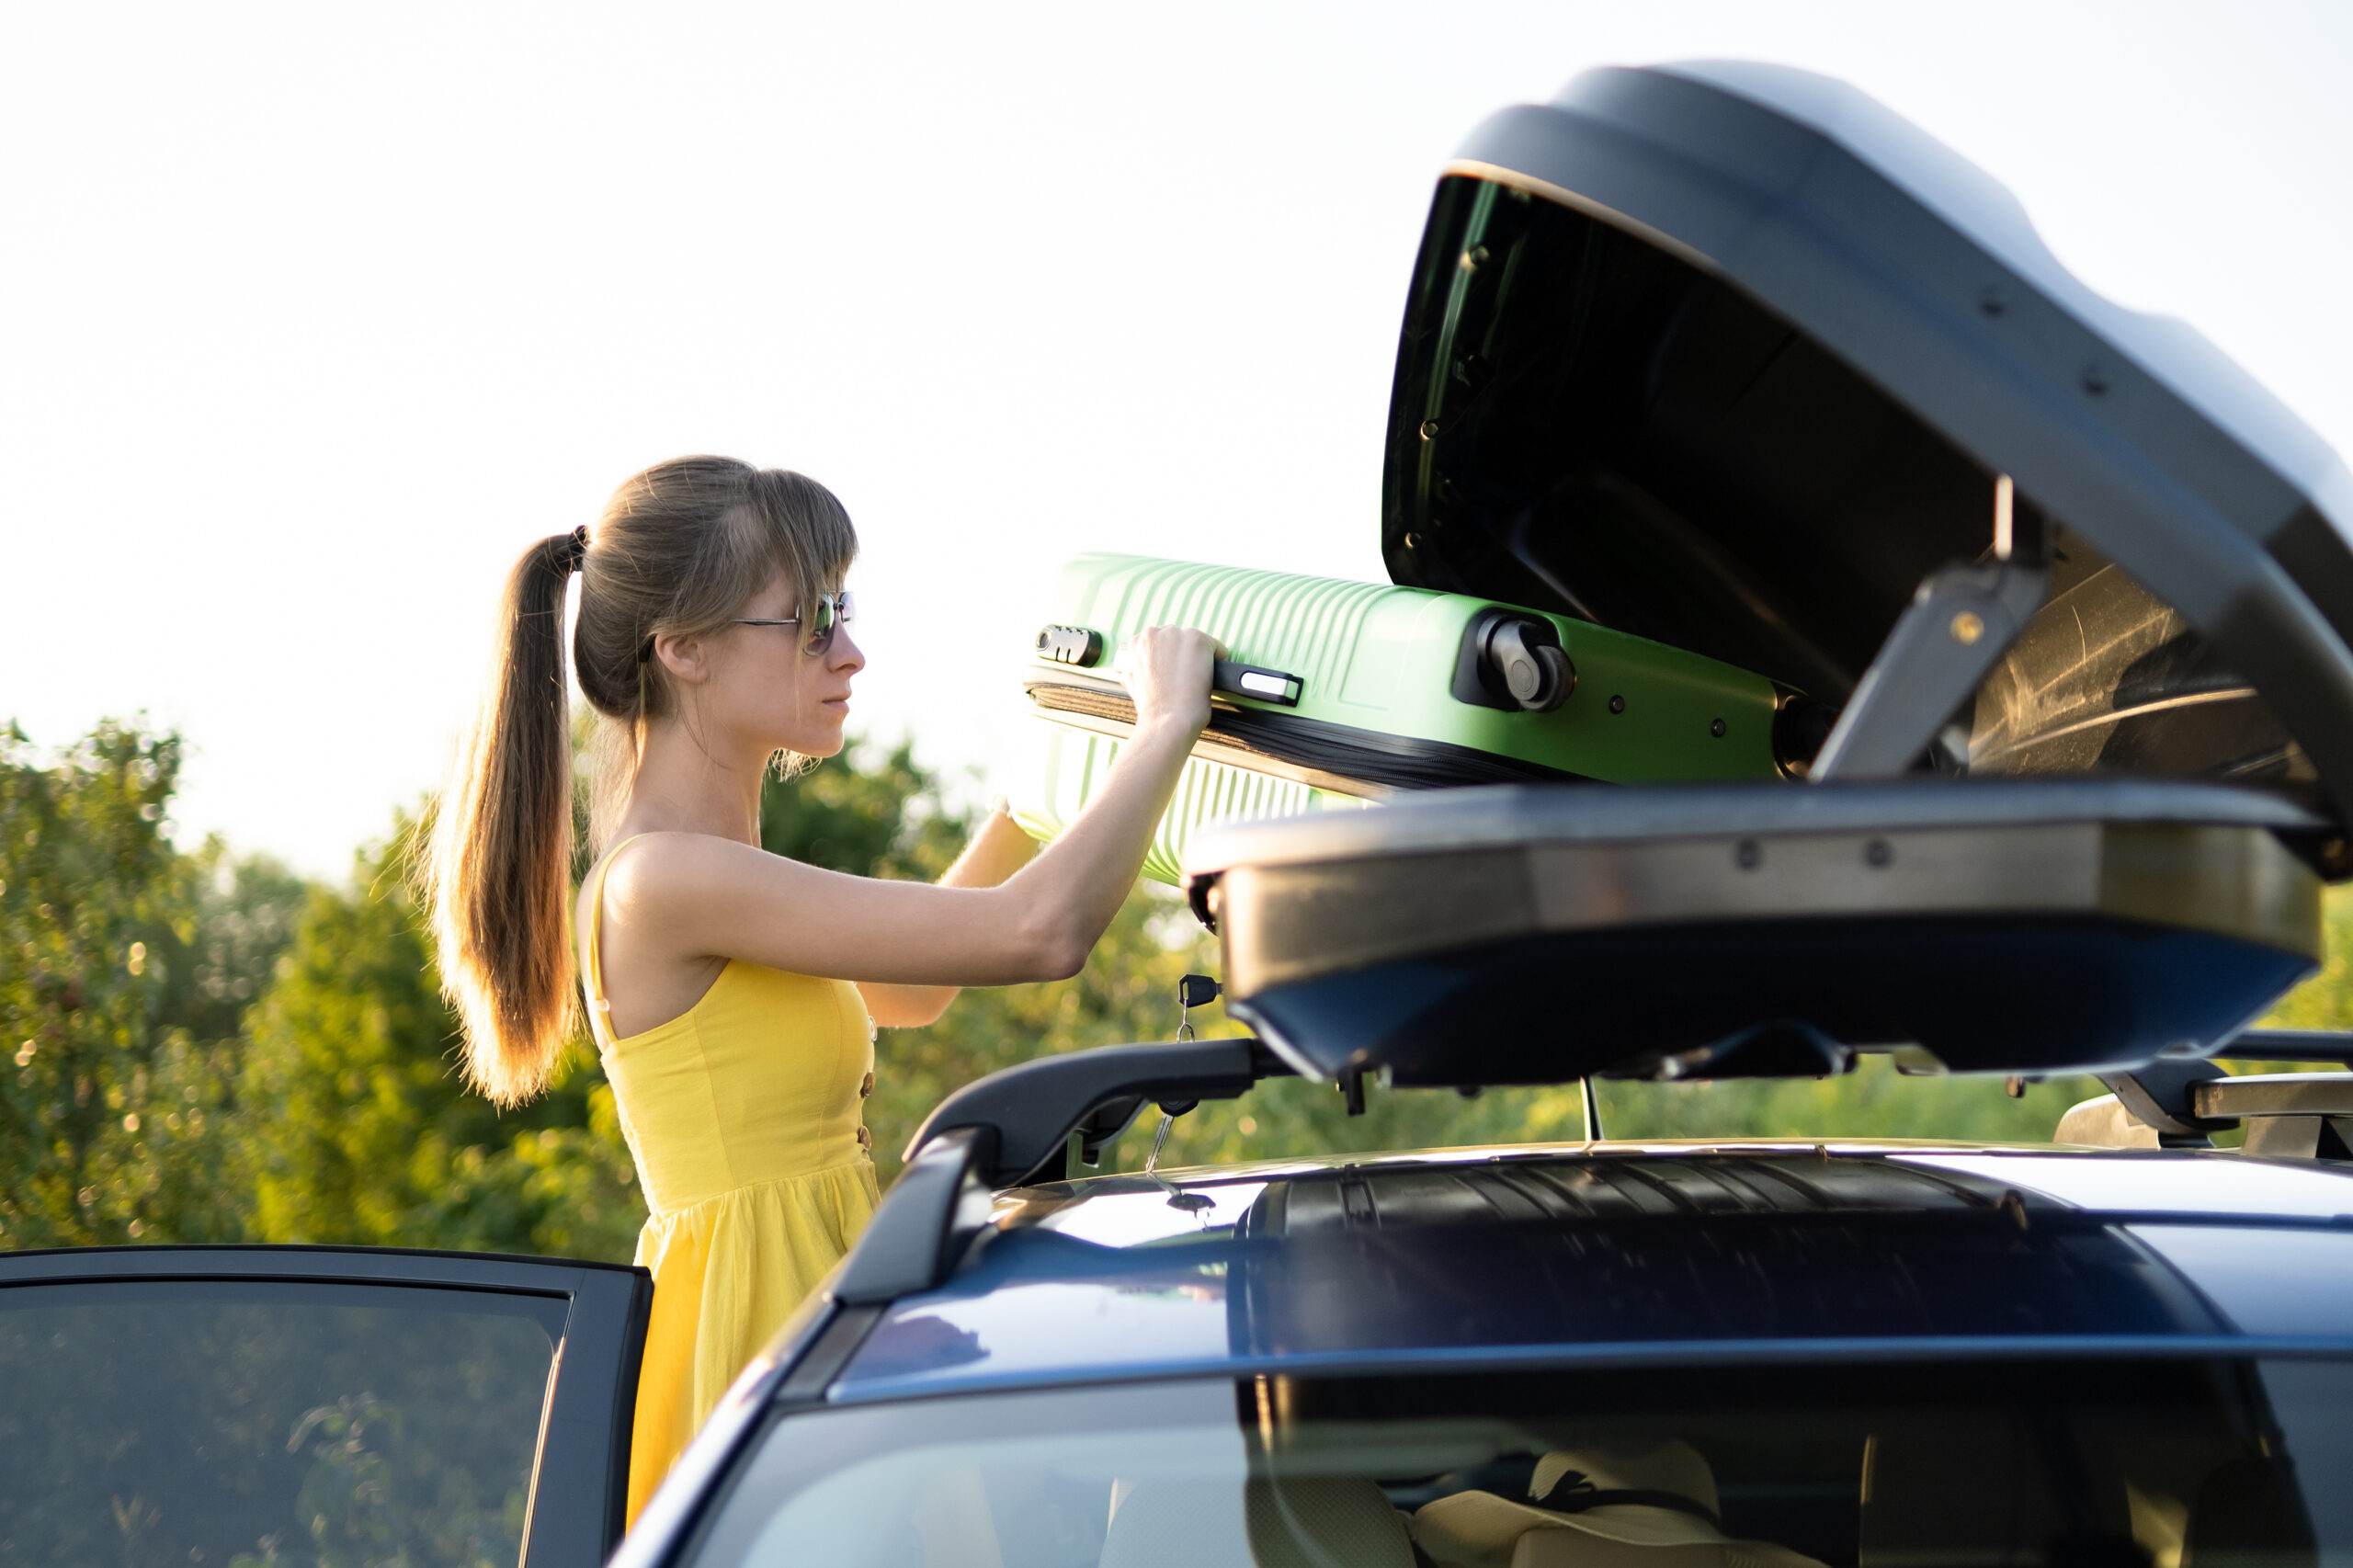 How will a Roof Rack Affect Your Car?